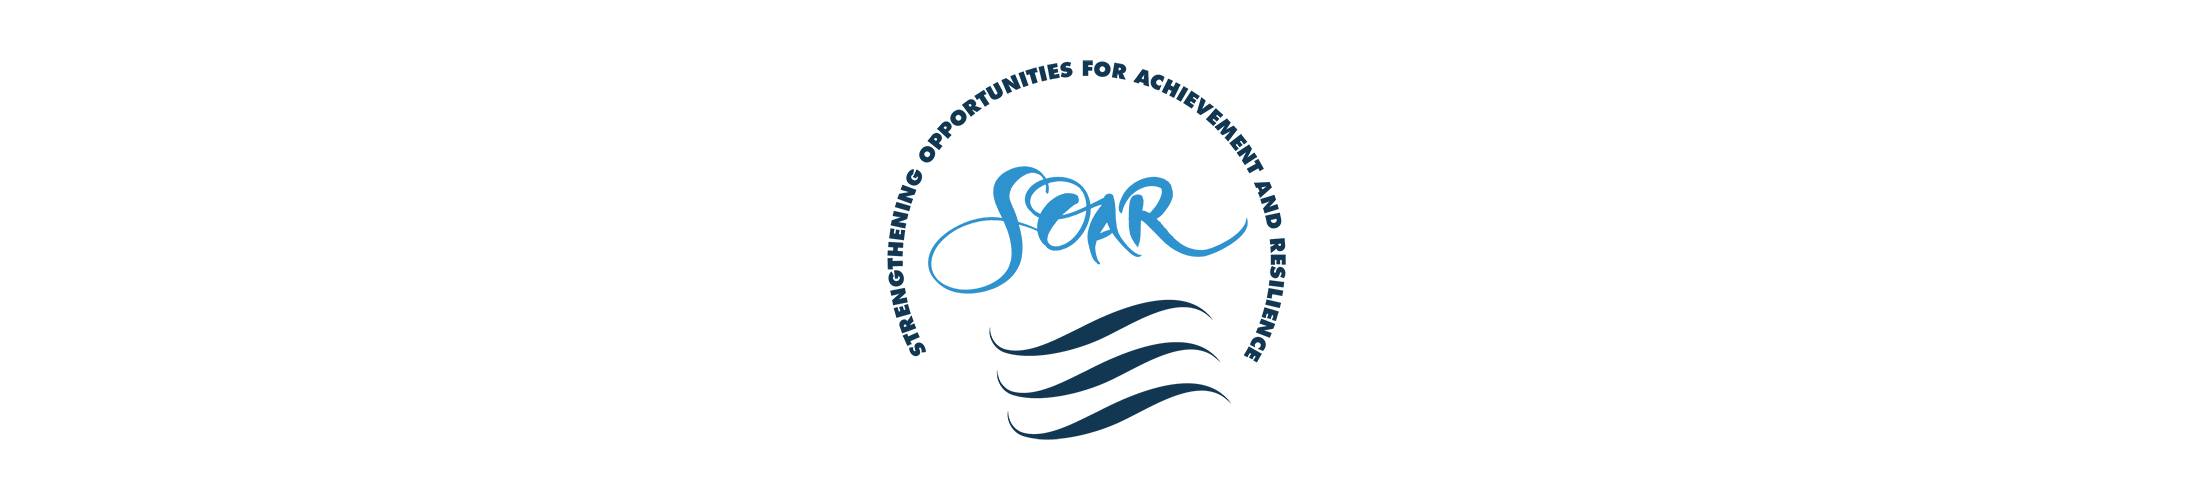 SOAR (Strengthening Opportunities for Achievement and Resilience) Logo